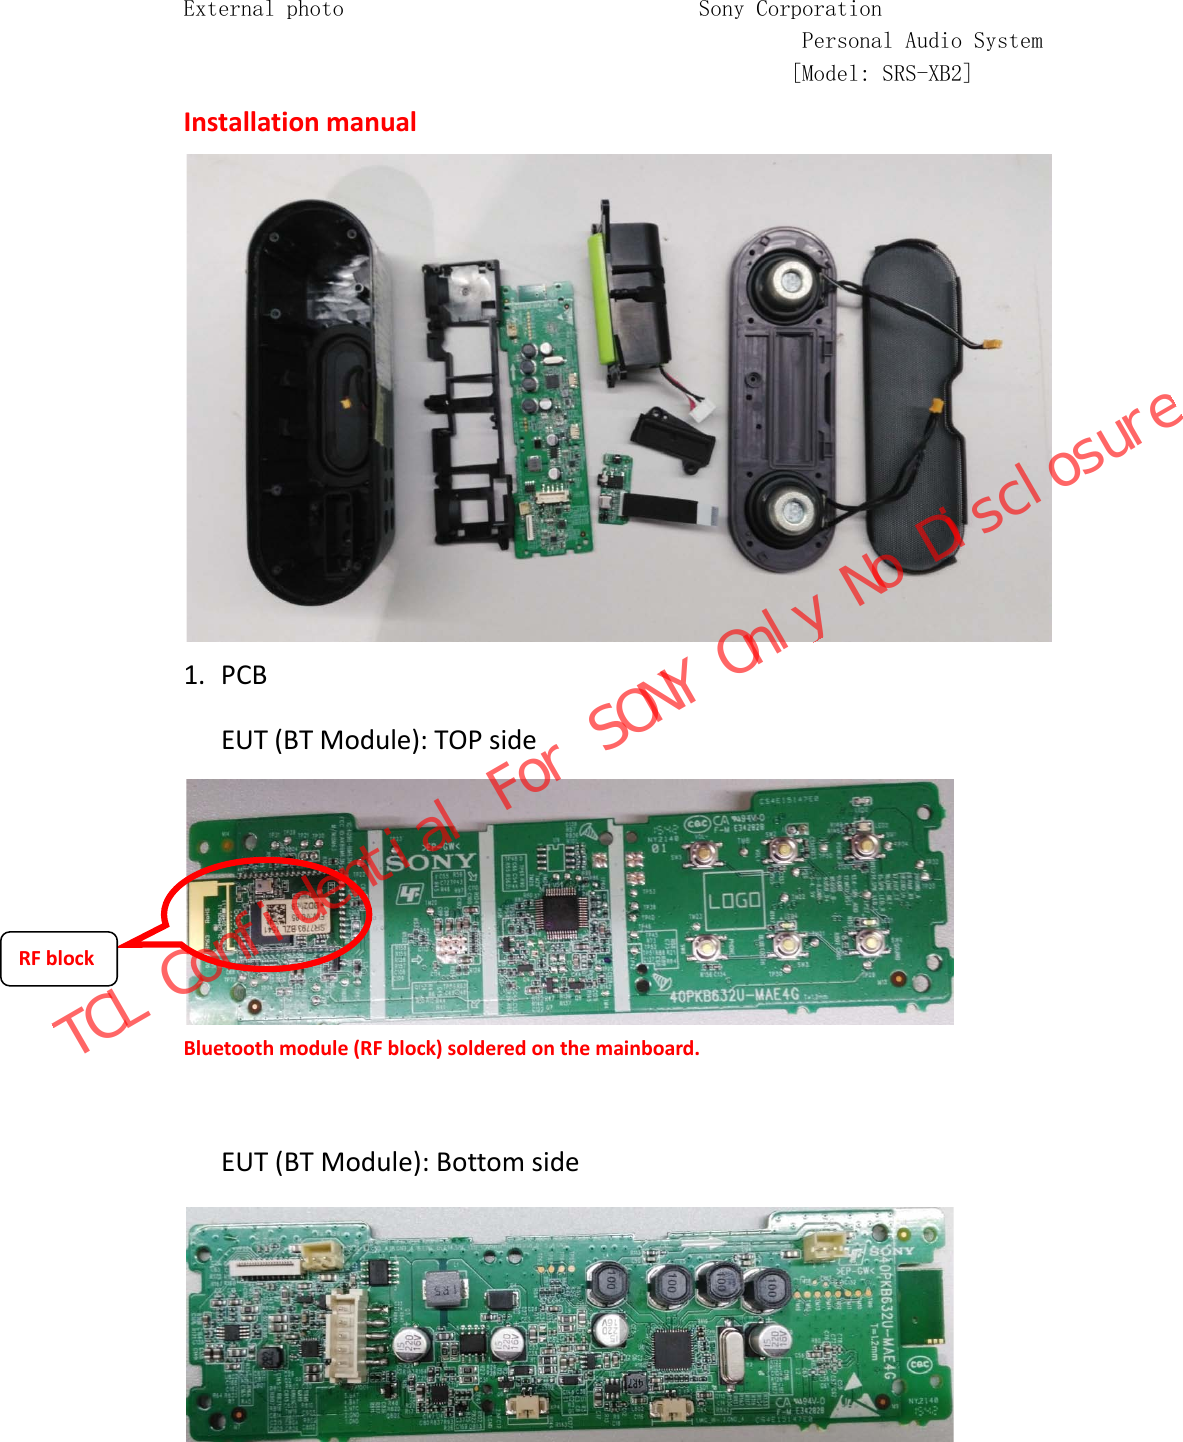 External photo                               Sony Corporation                                                       Personal Audio System                                                      [Model: SRS-XB2] Installation manual  1. PCB   EUT (BT Module): TOP side Bluetooth module (RF block) soldered on the mainboard.  EUT (BT Module): Bottom side   RF block TCL Confidential For SONY Only No Disclosure